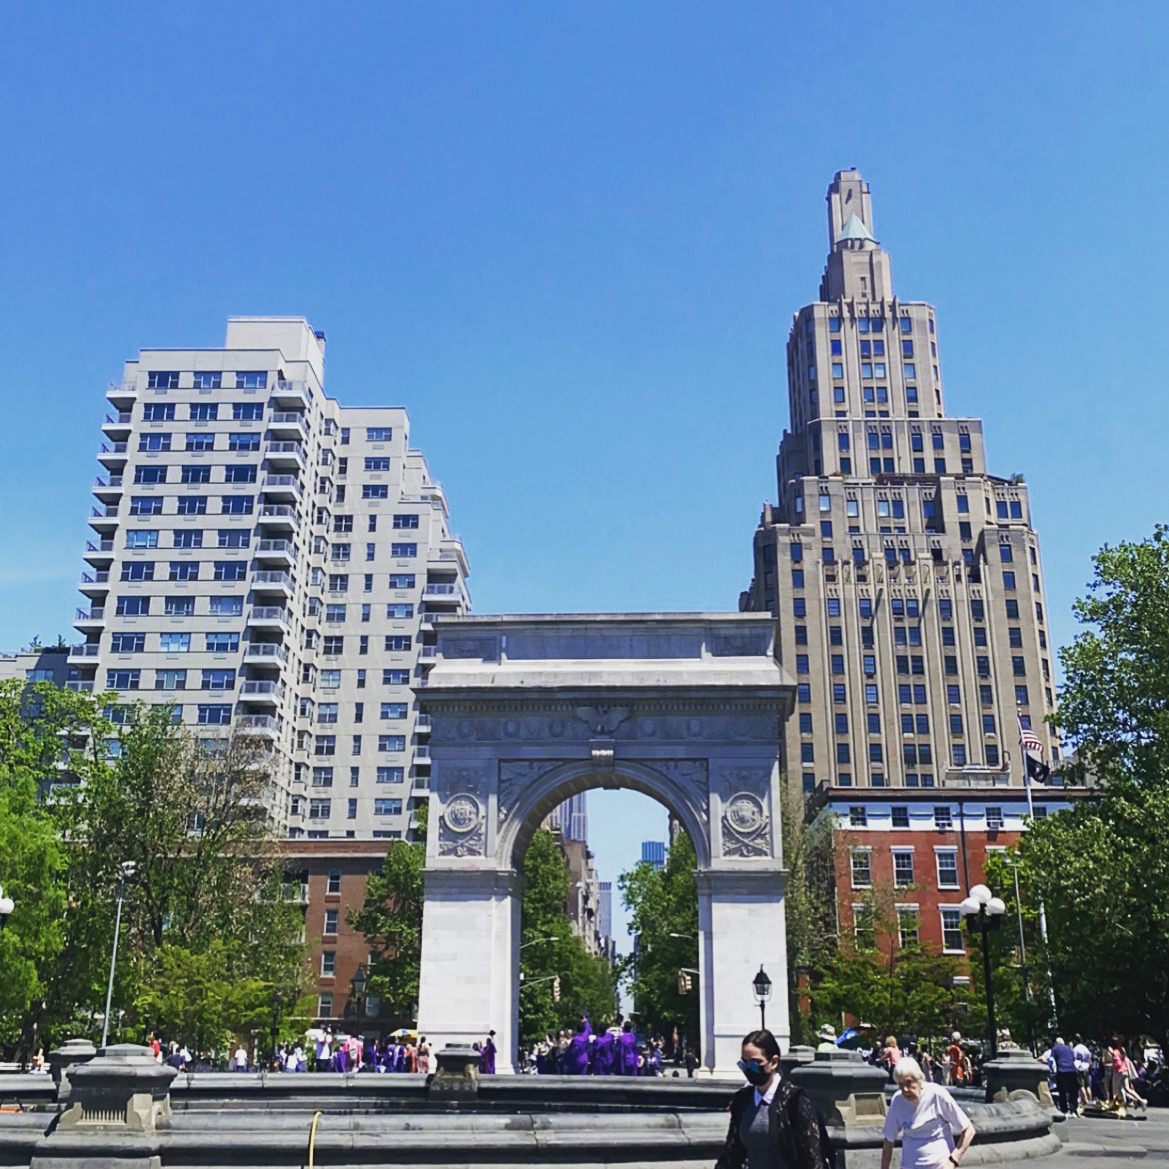 The beautiful Washington Square Arch on a clear day.